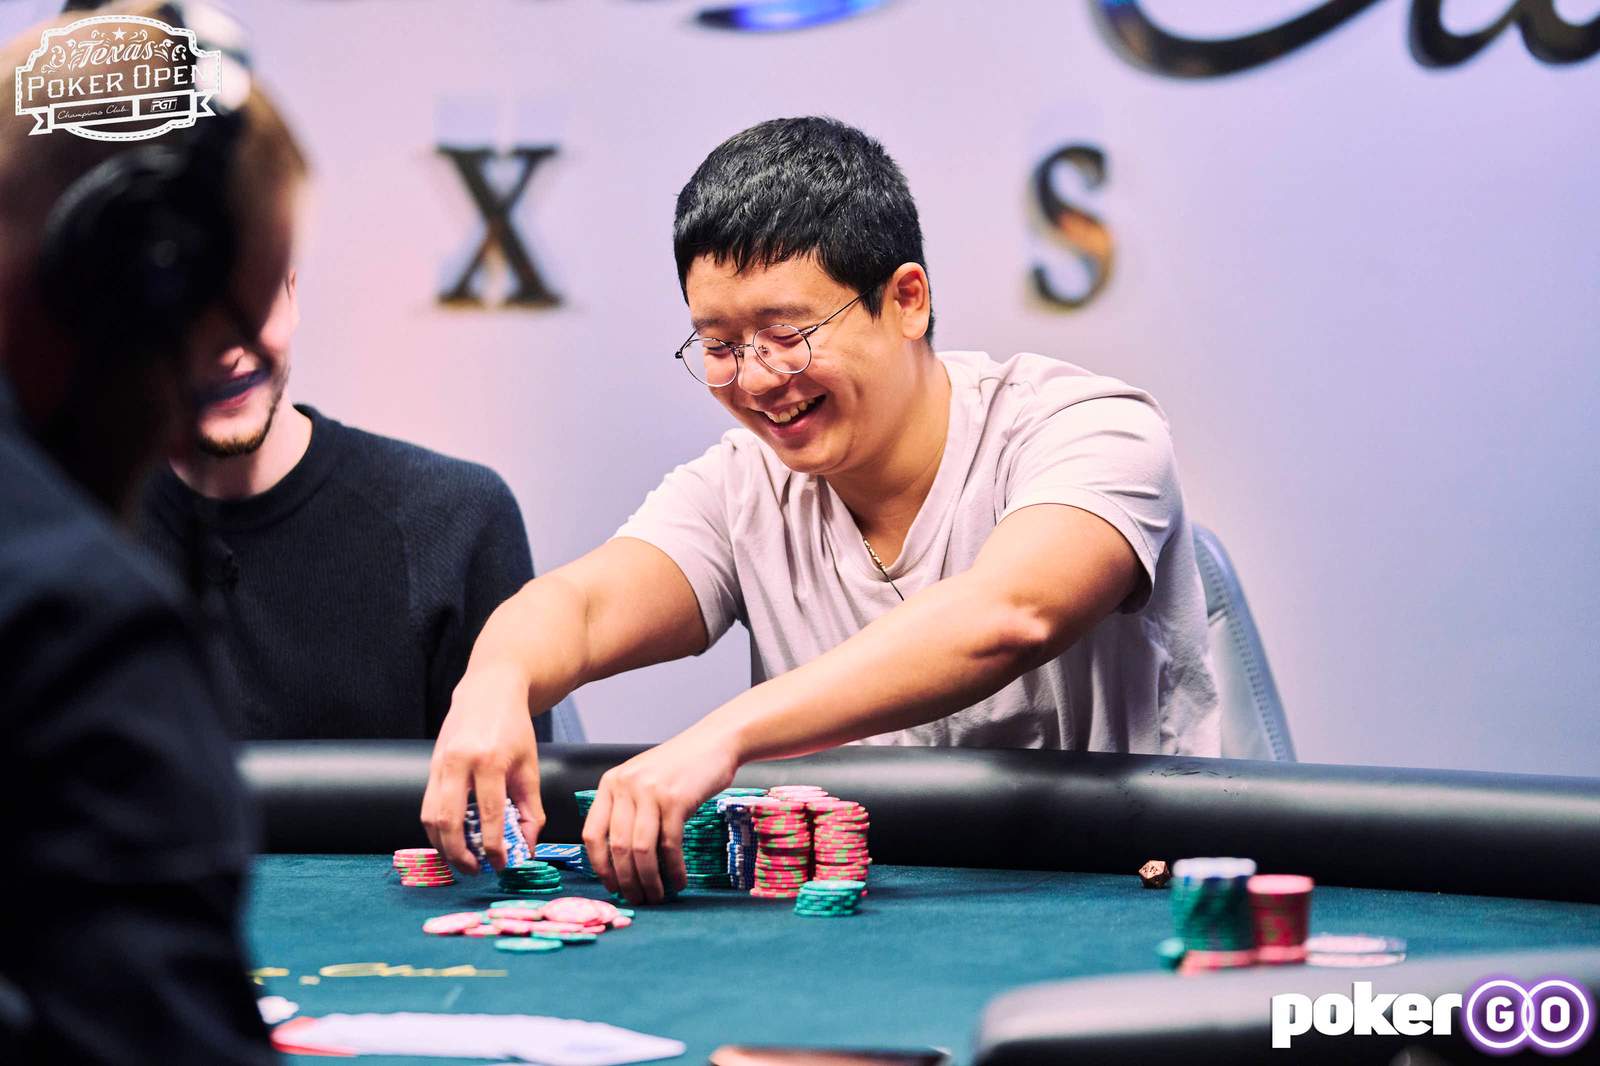 Yunkyu Song Leads Final 15 Players of Texas Poker Open $3,300 Main Event